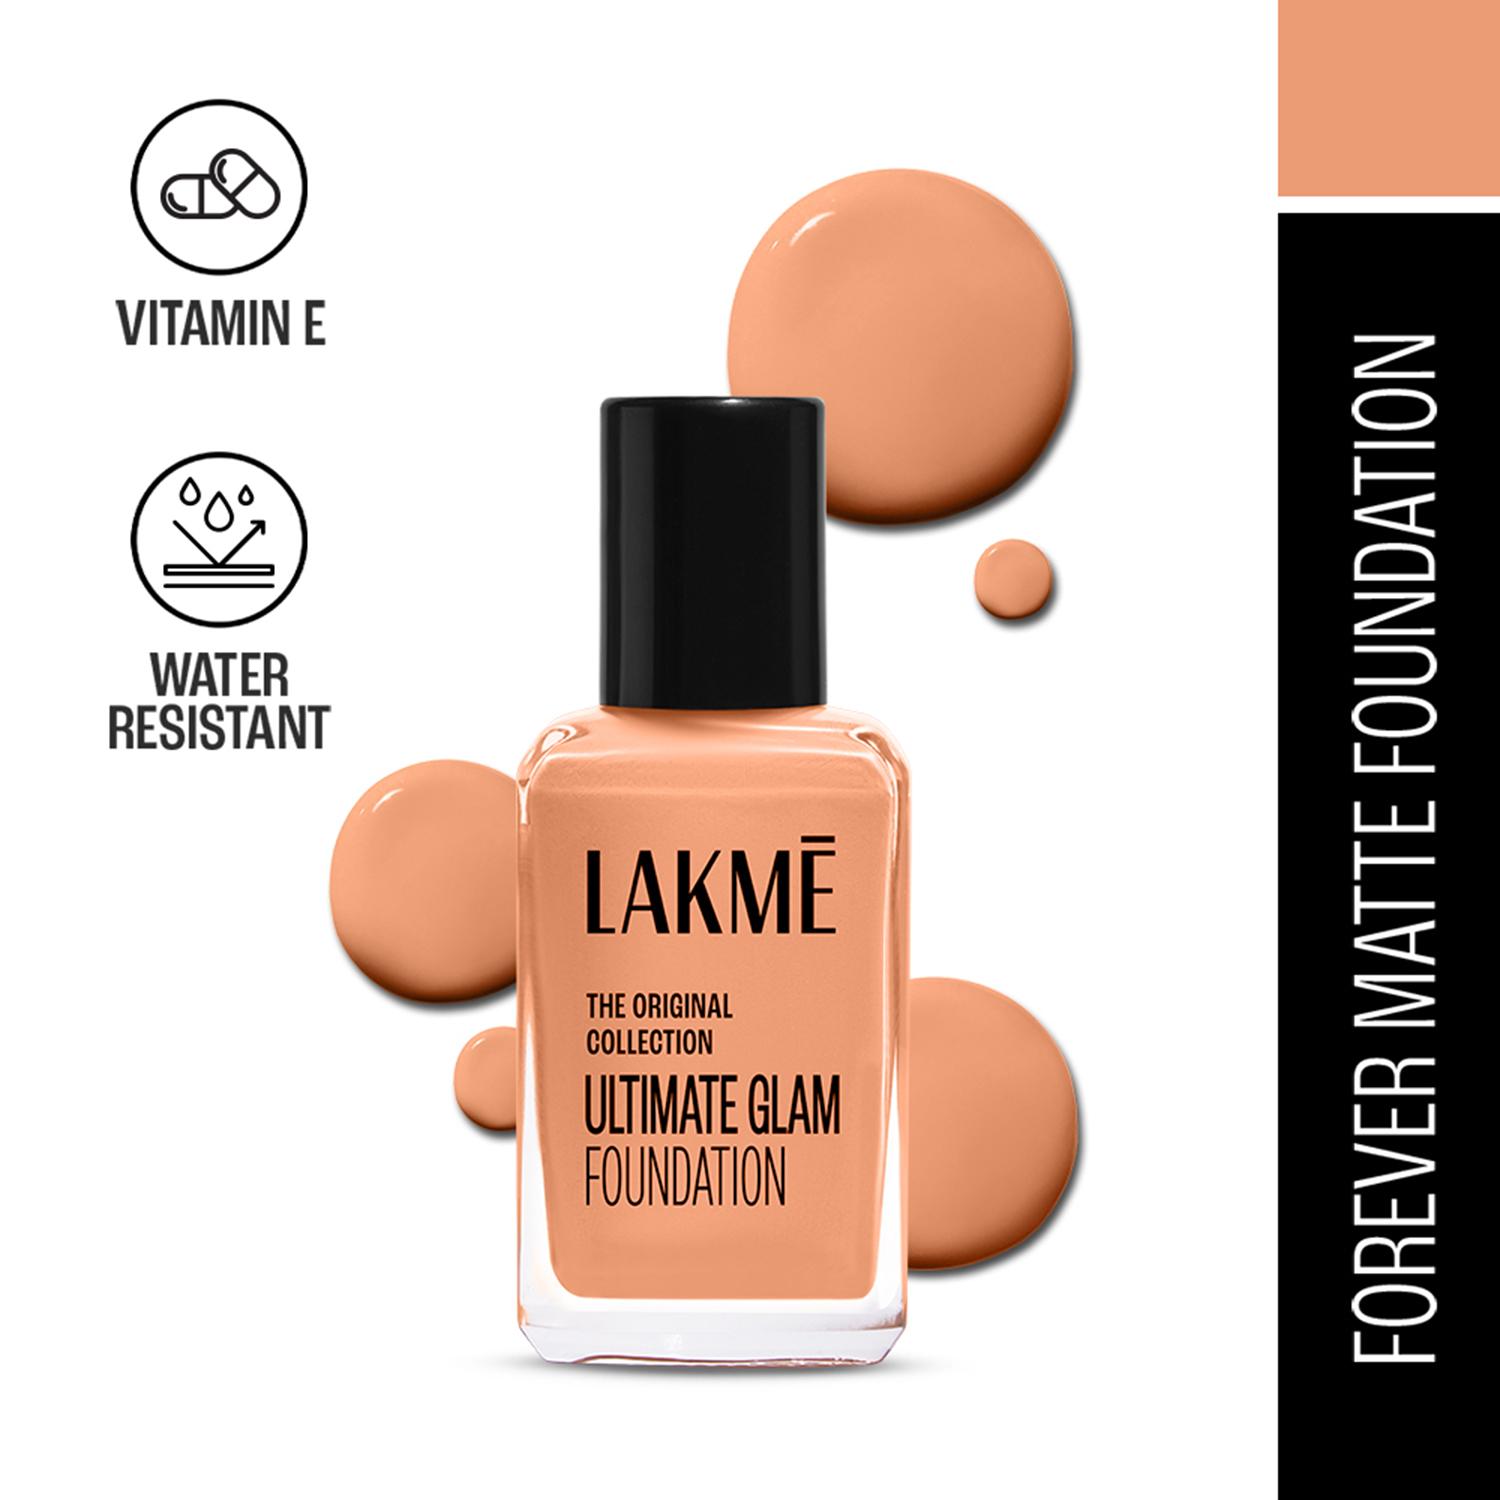 Lakme | Lakme FOREVER MATTE FOUNDATION for Superior Coverage Vit E lightweight & water-resist Pearl (27 ml)